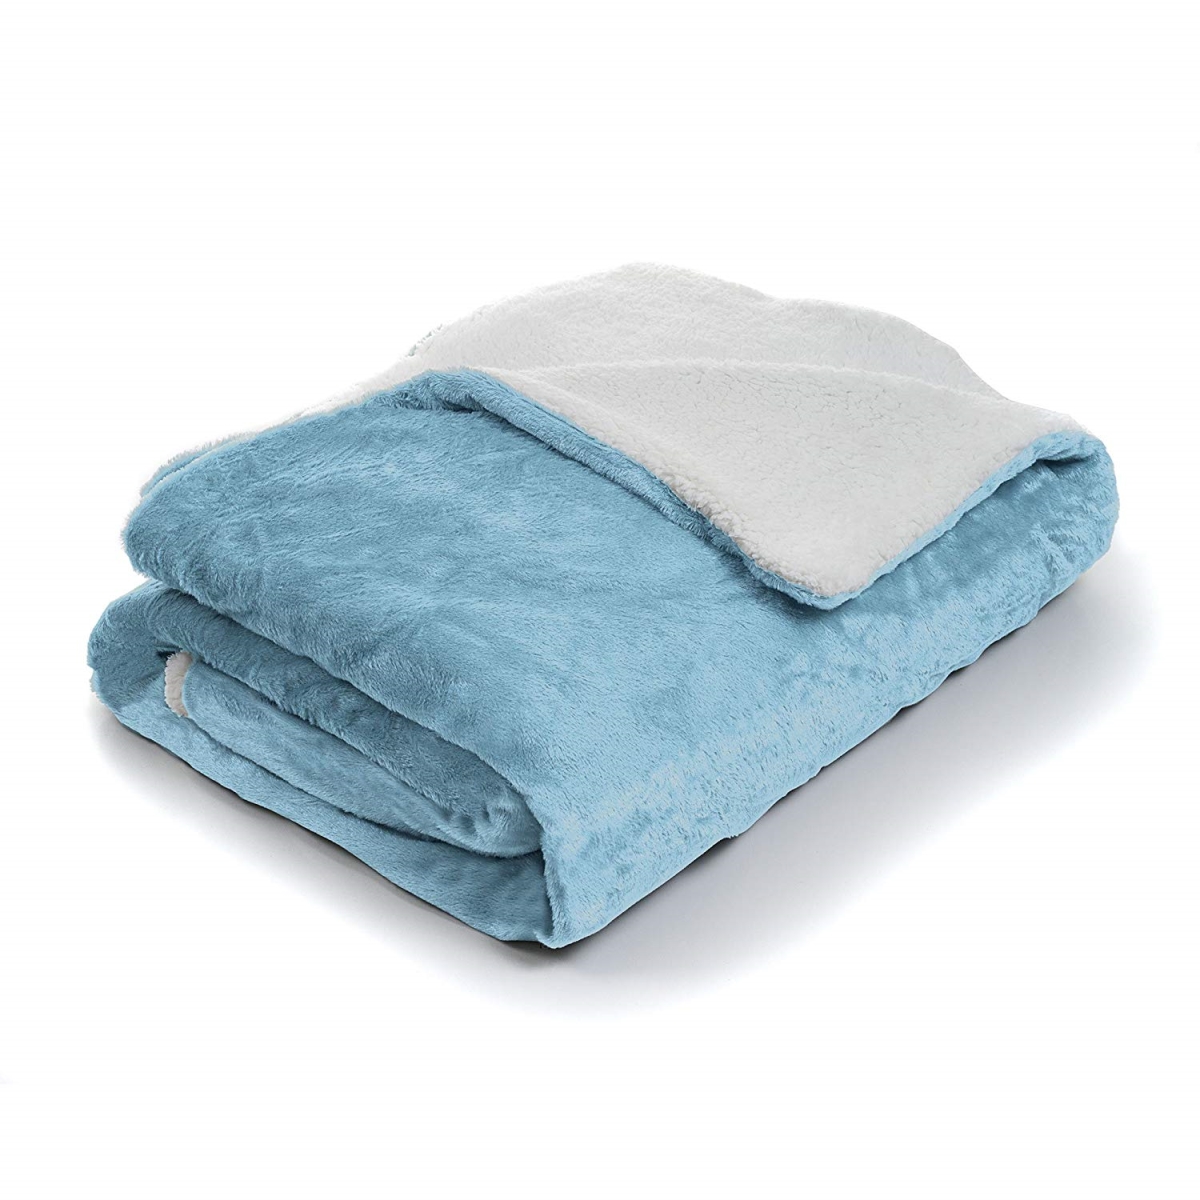 61a-06424 Fleece Blanket With Sherpa Backing, King Size - Blue